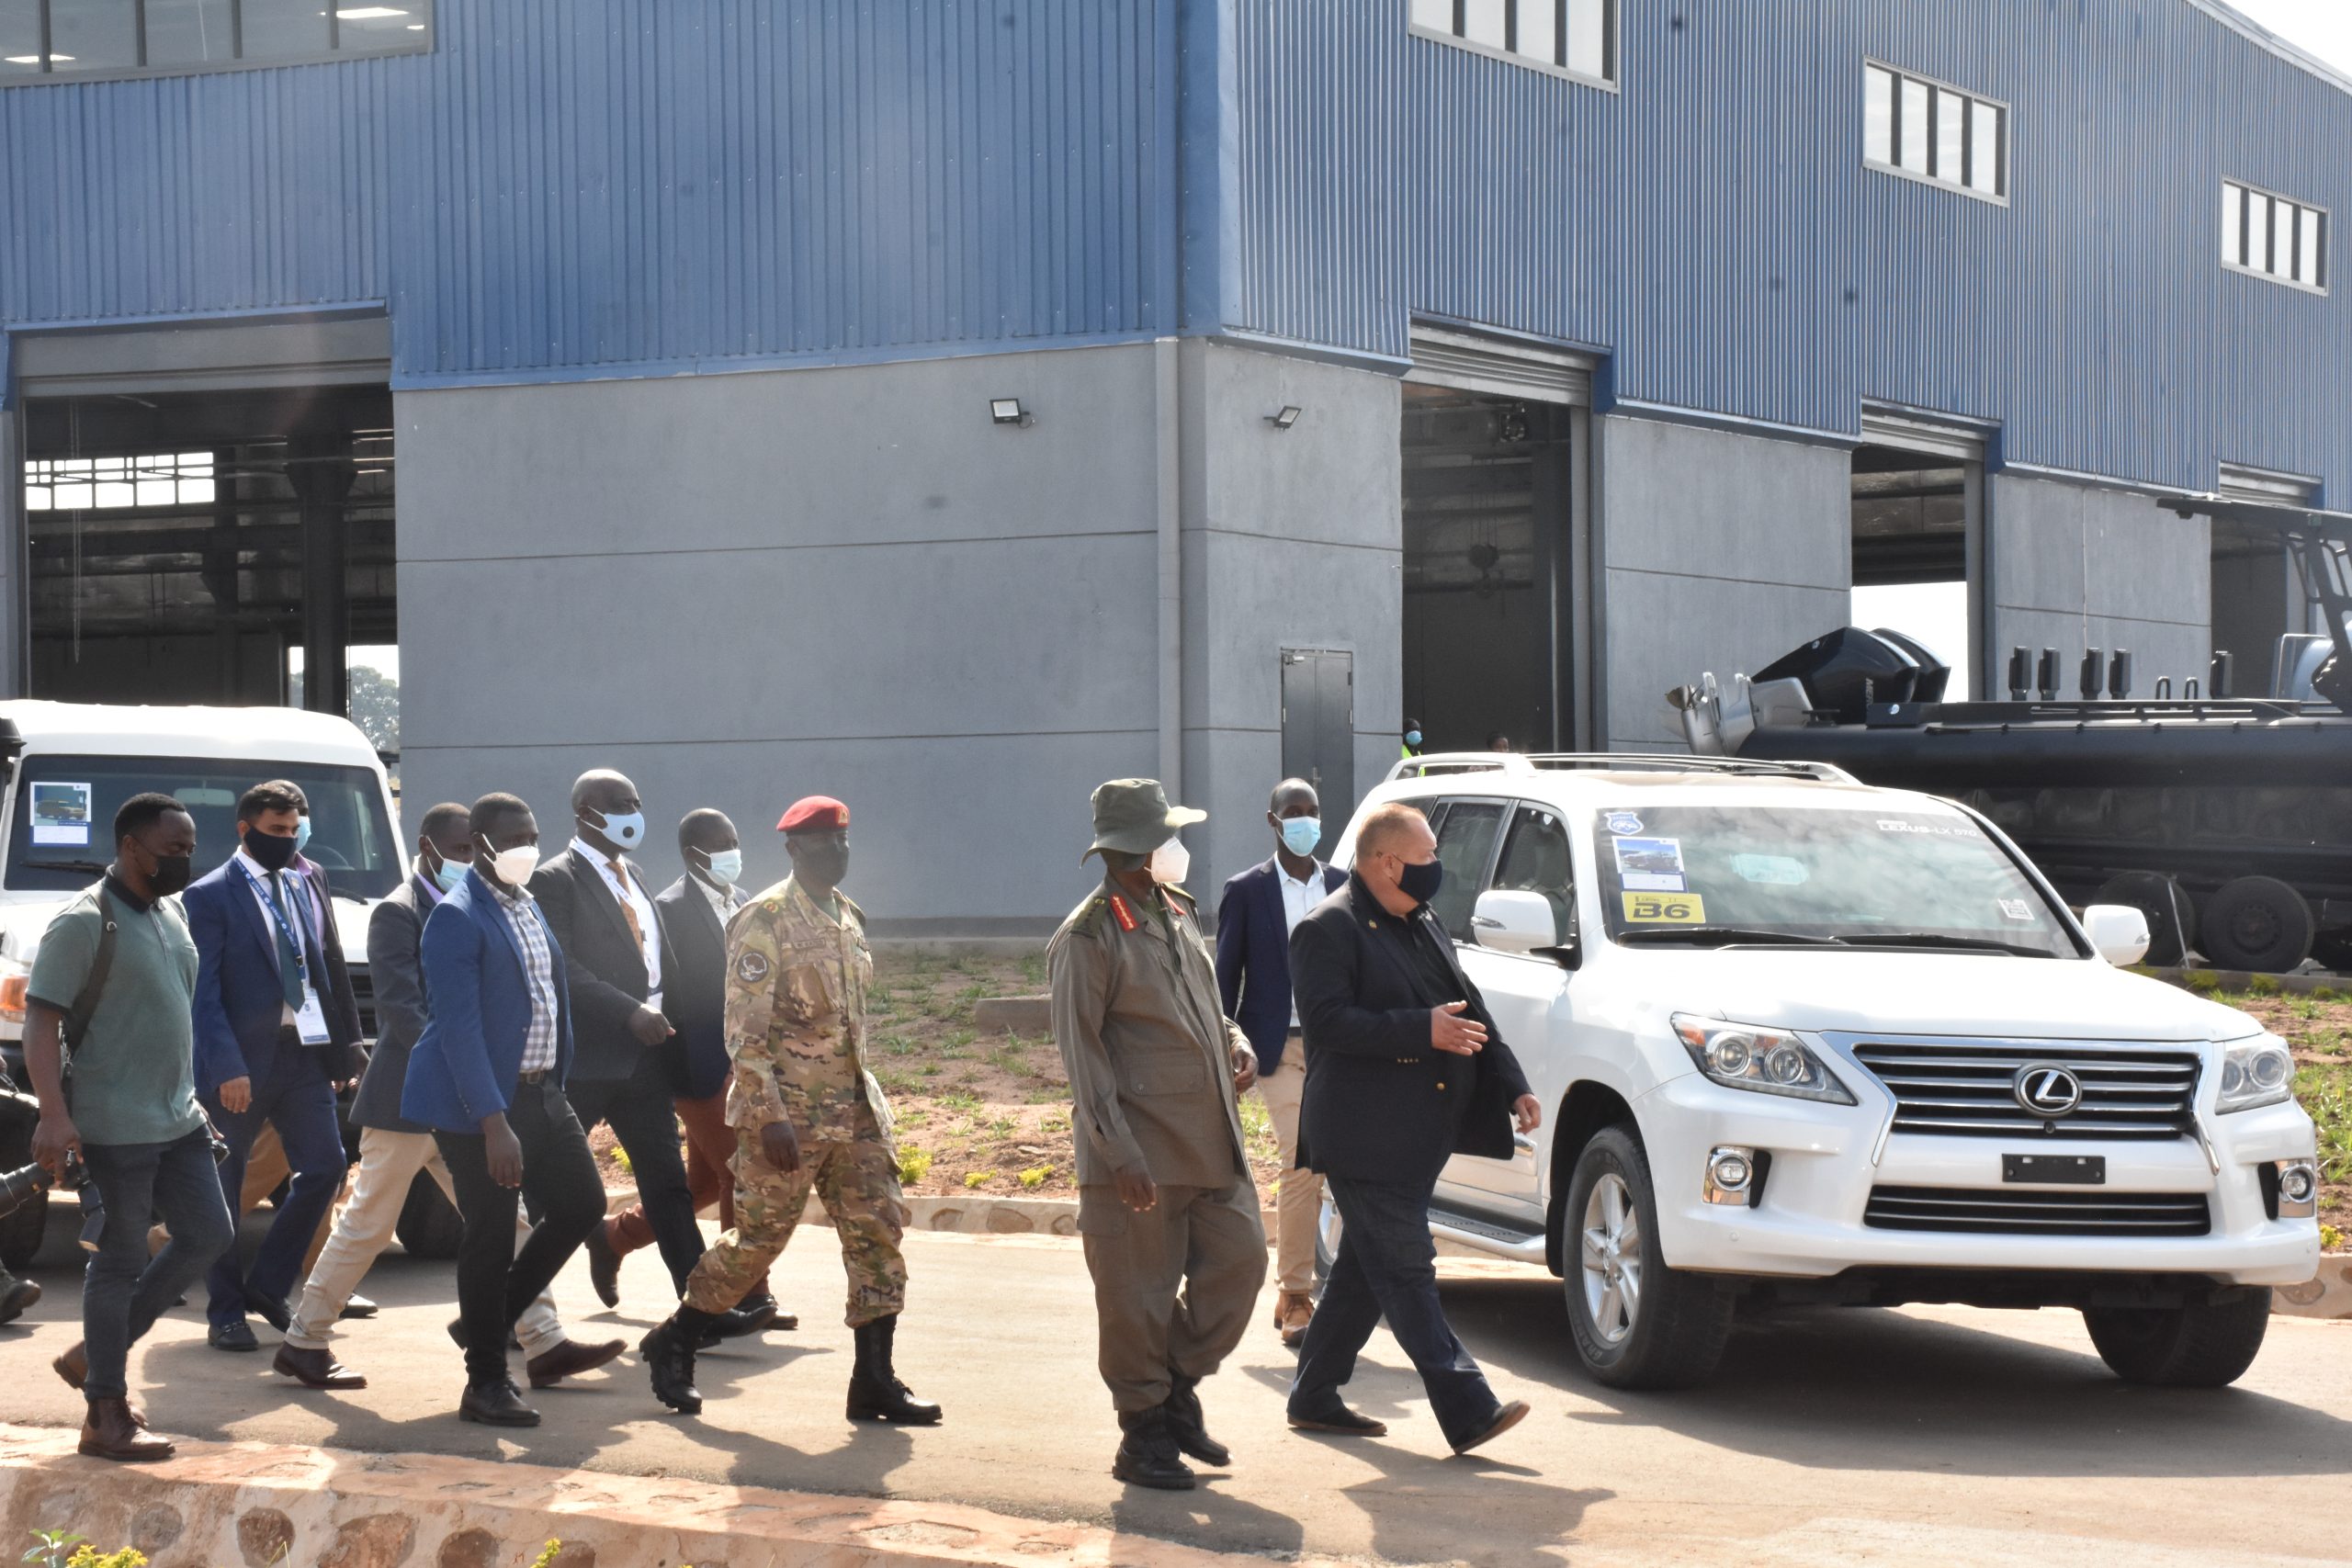 Streit Group Launches Armoured Vehicle Manufacturing and Assembling Facility in Uganda